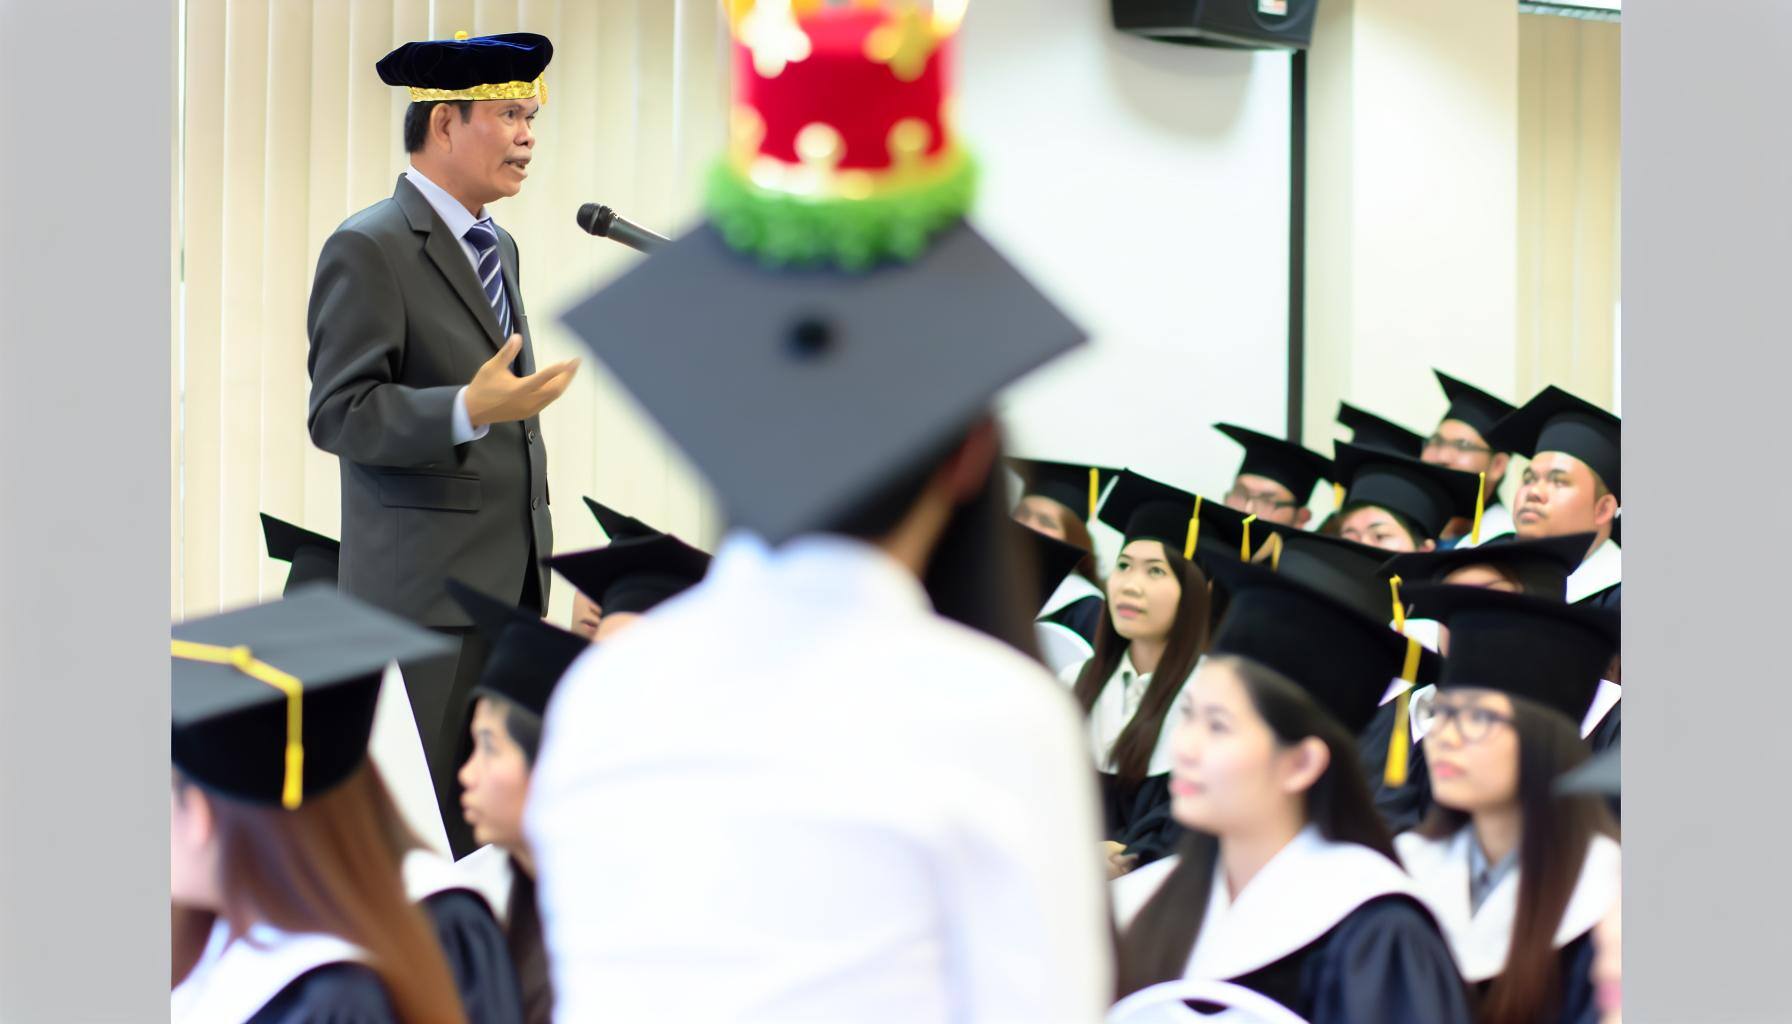 size 64 content dba, a person wear crown cap and look like a leader giving speech, like graduation ceremony